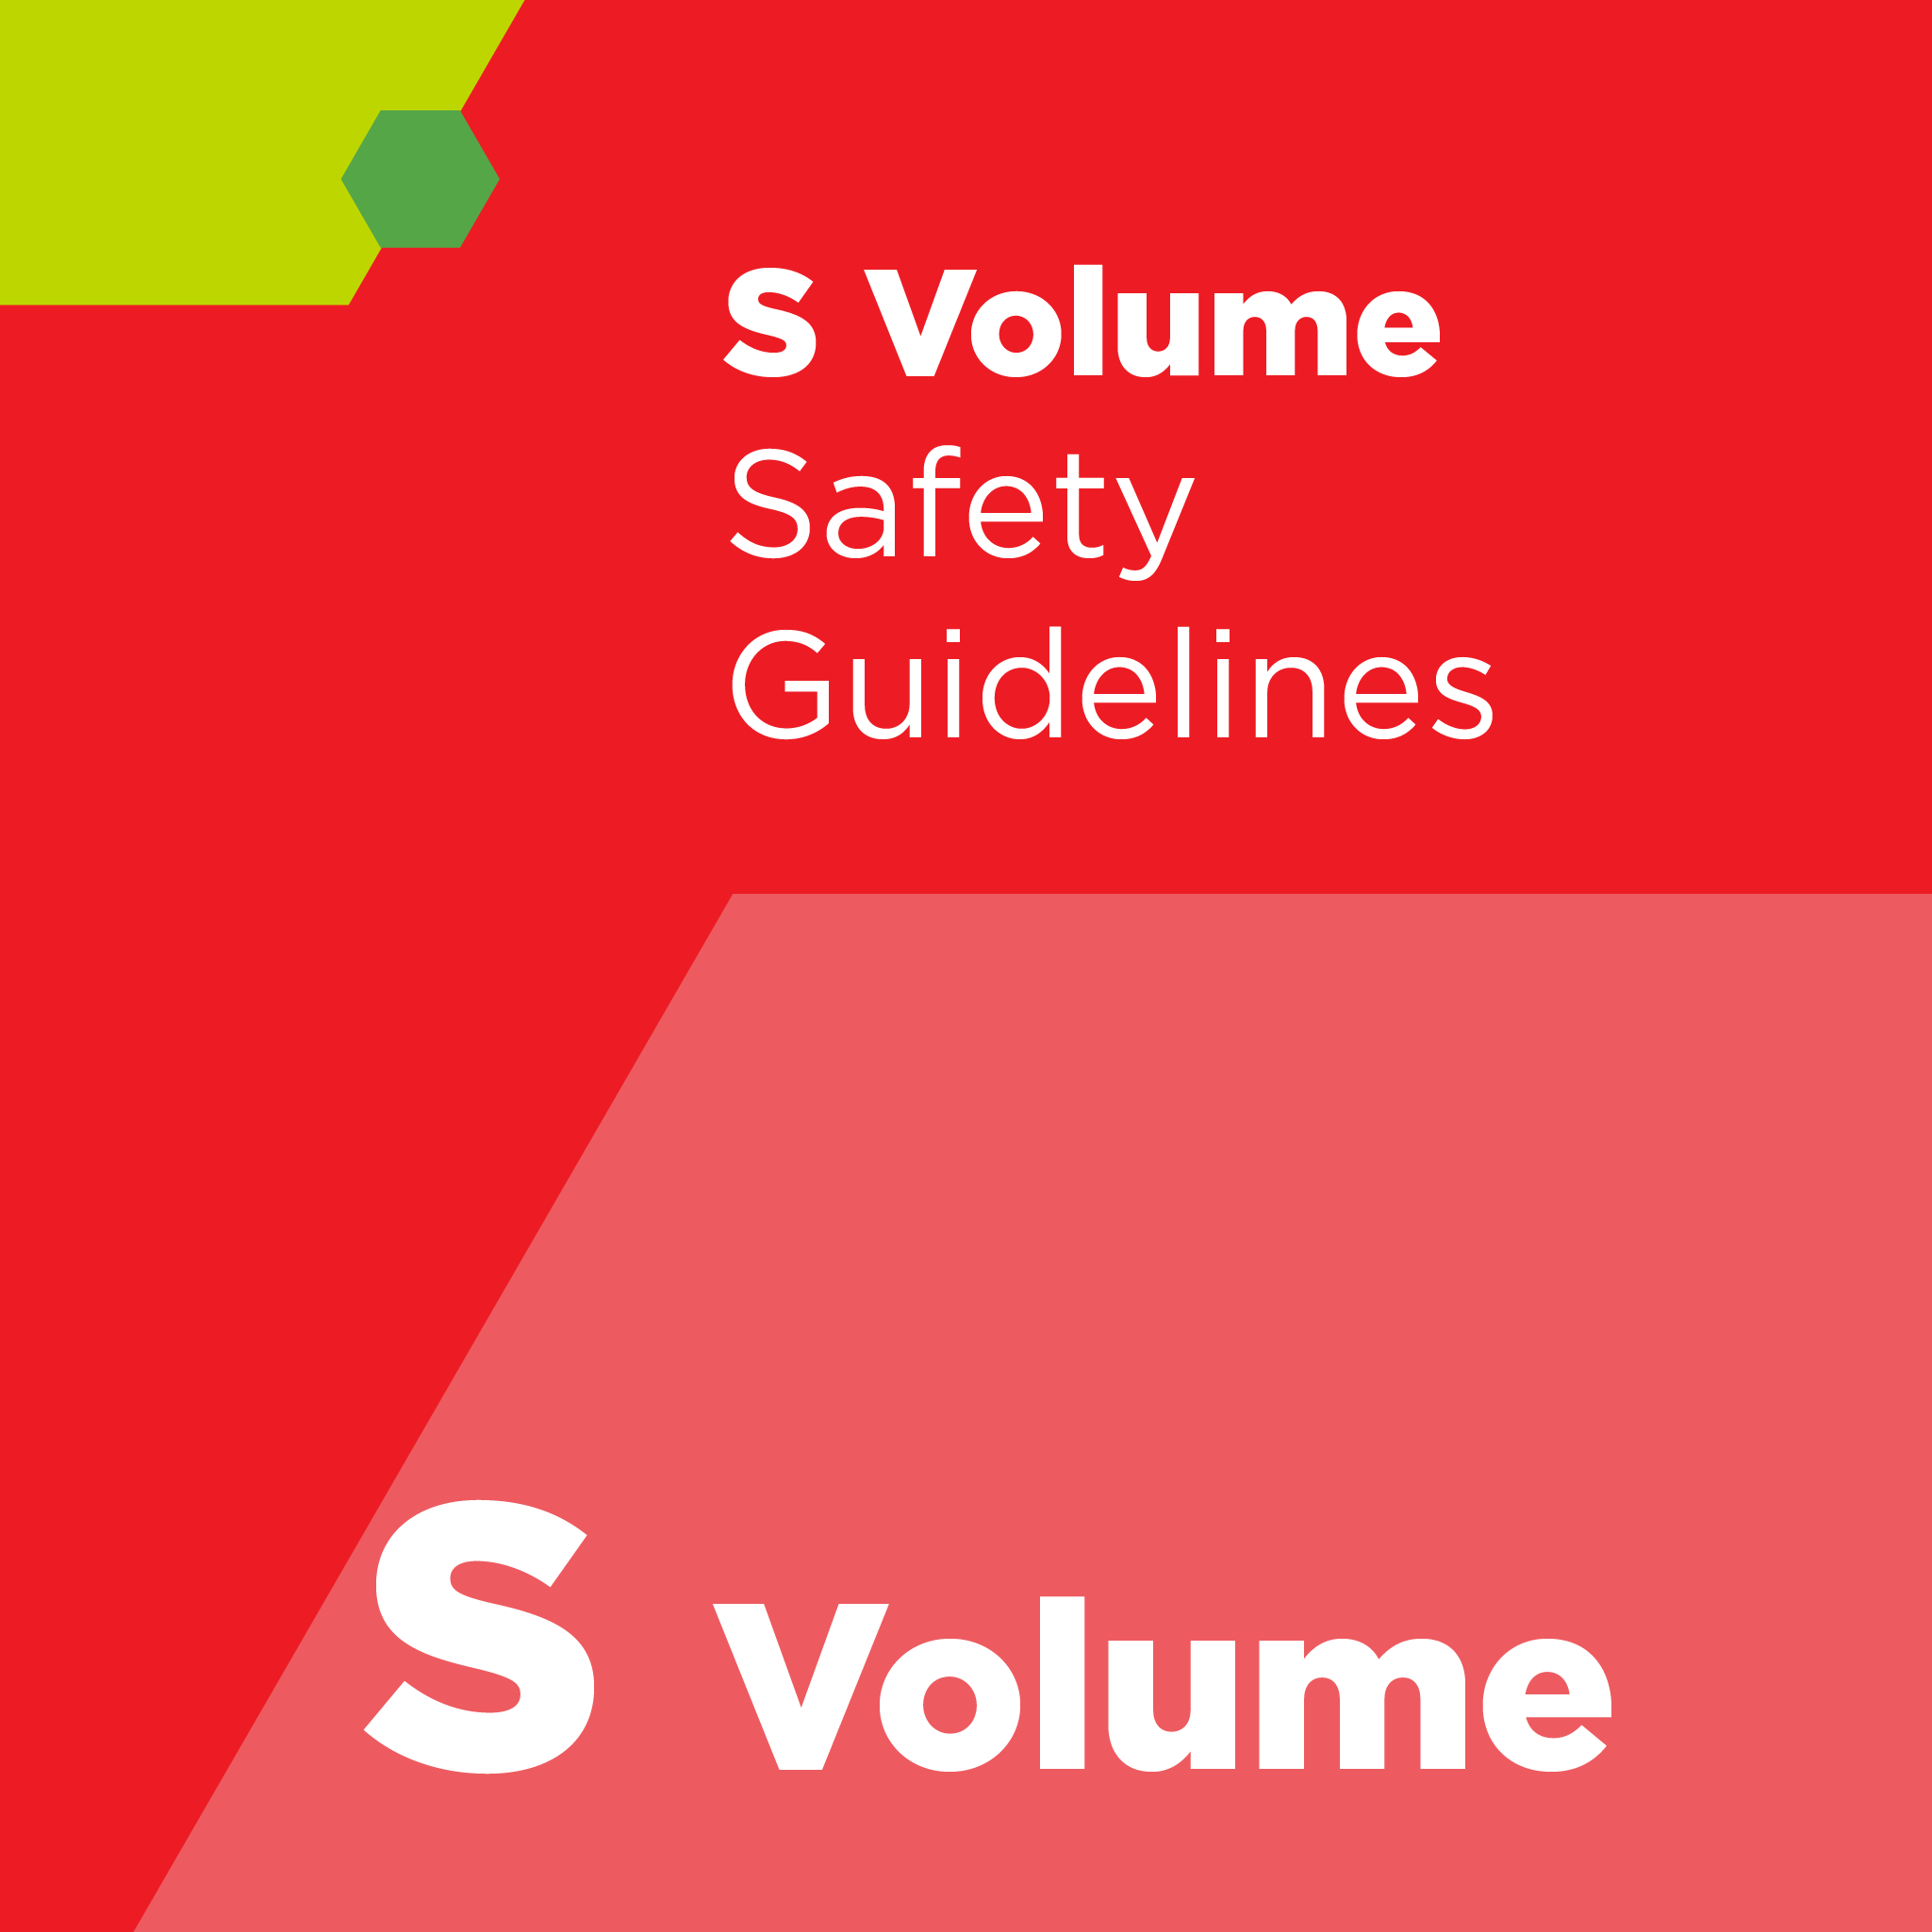 S02400 - SEMI S24 - Safety Guideline for Multi-Employer Work Areas